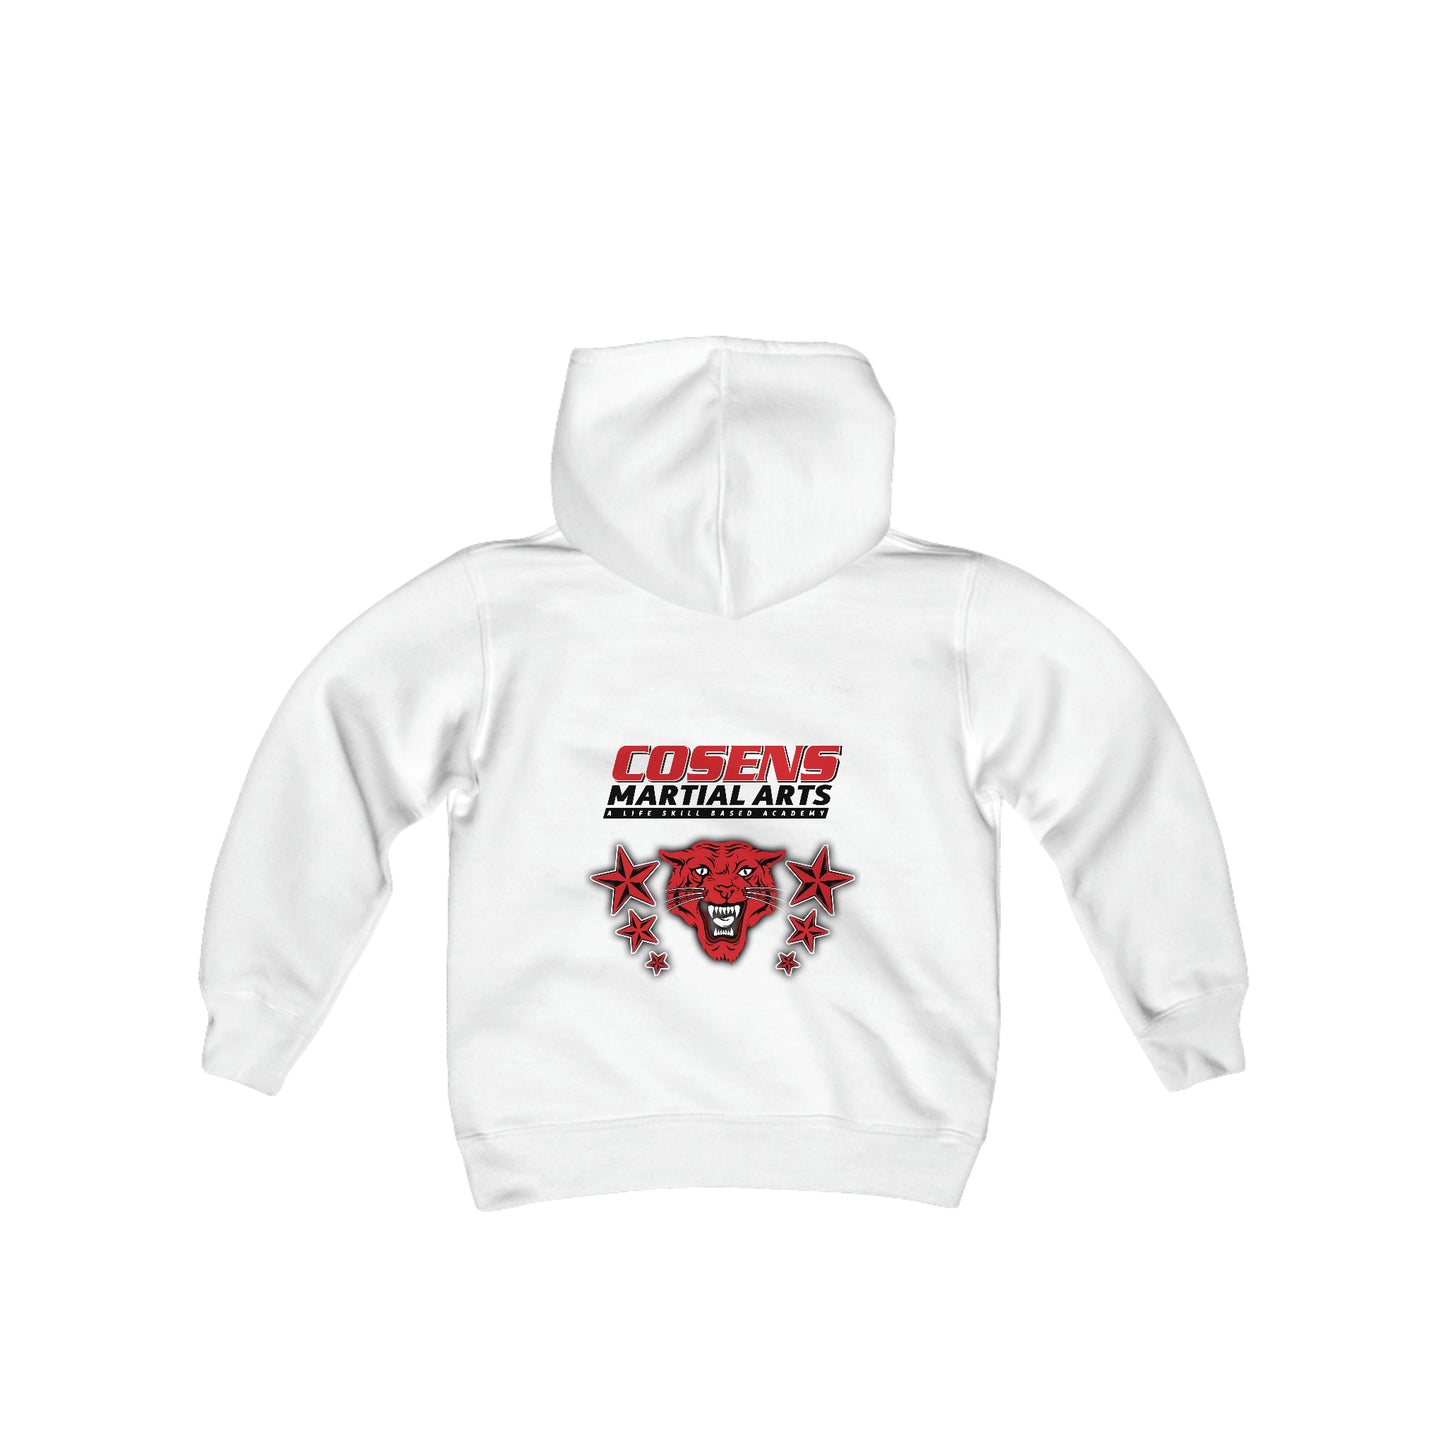 Youth Pullover Sweatshirt (Not customized with name)